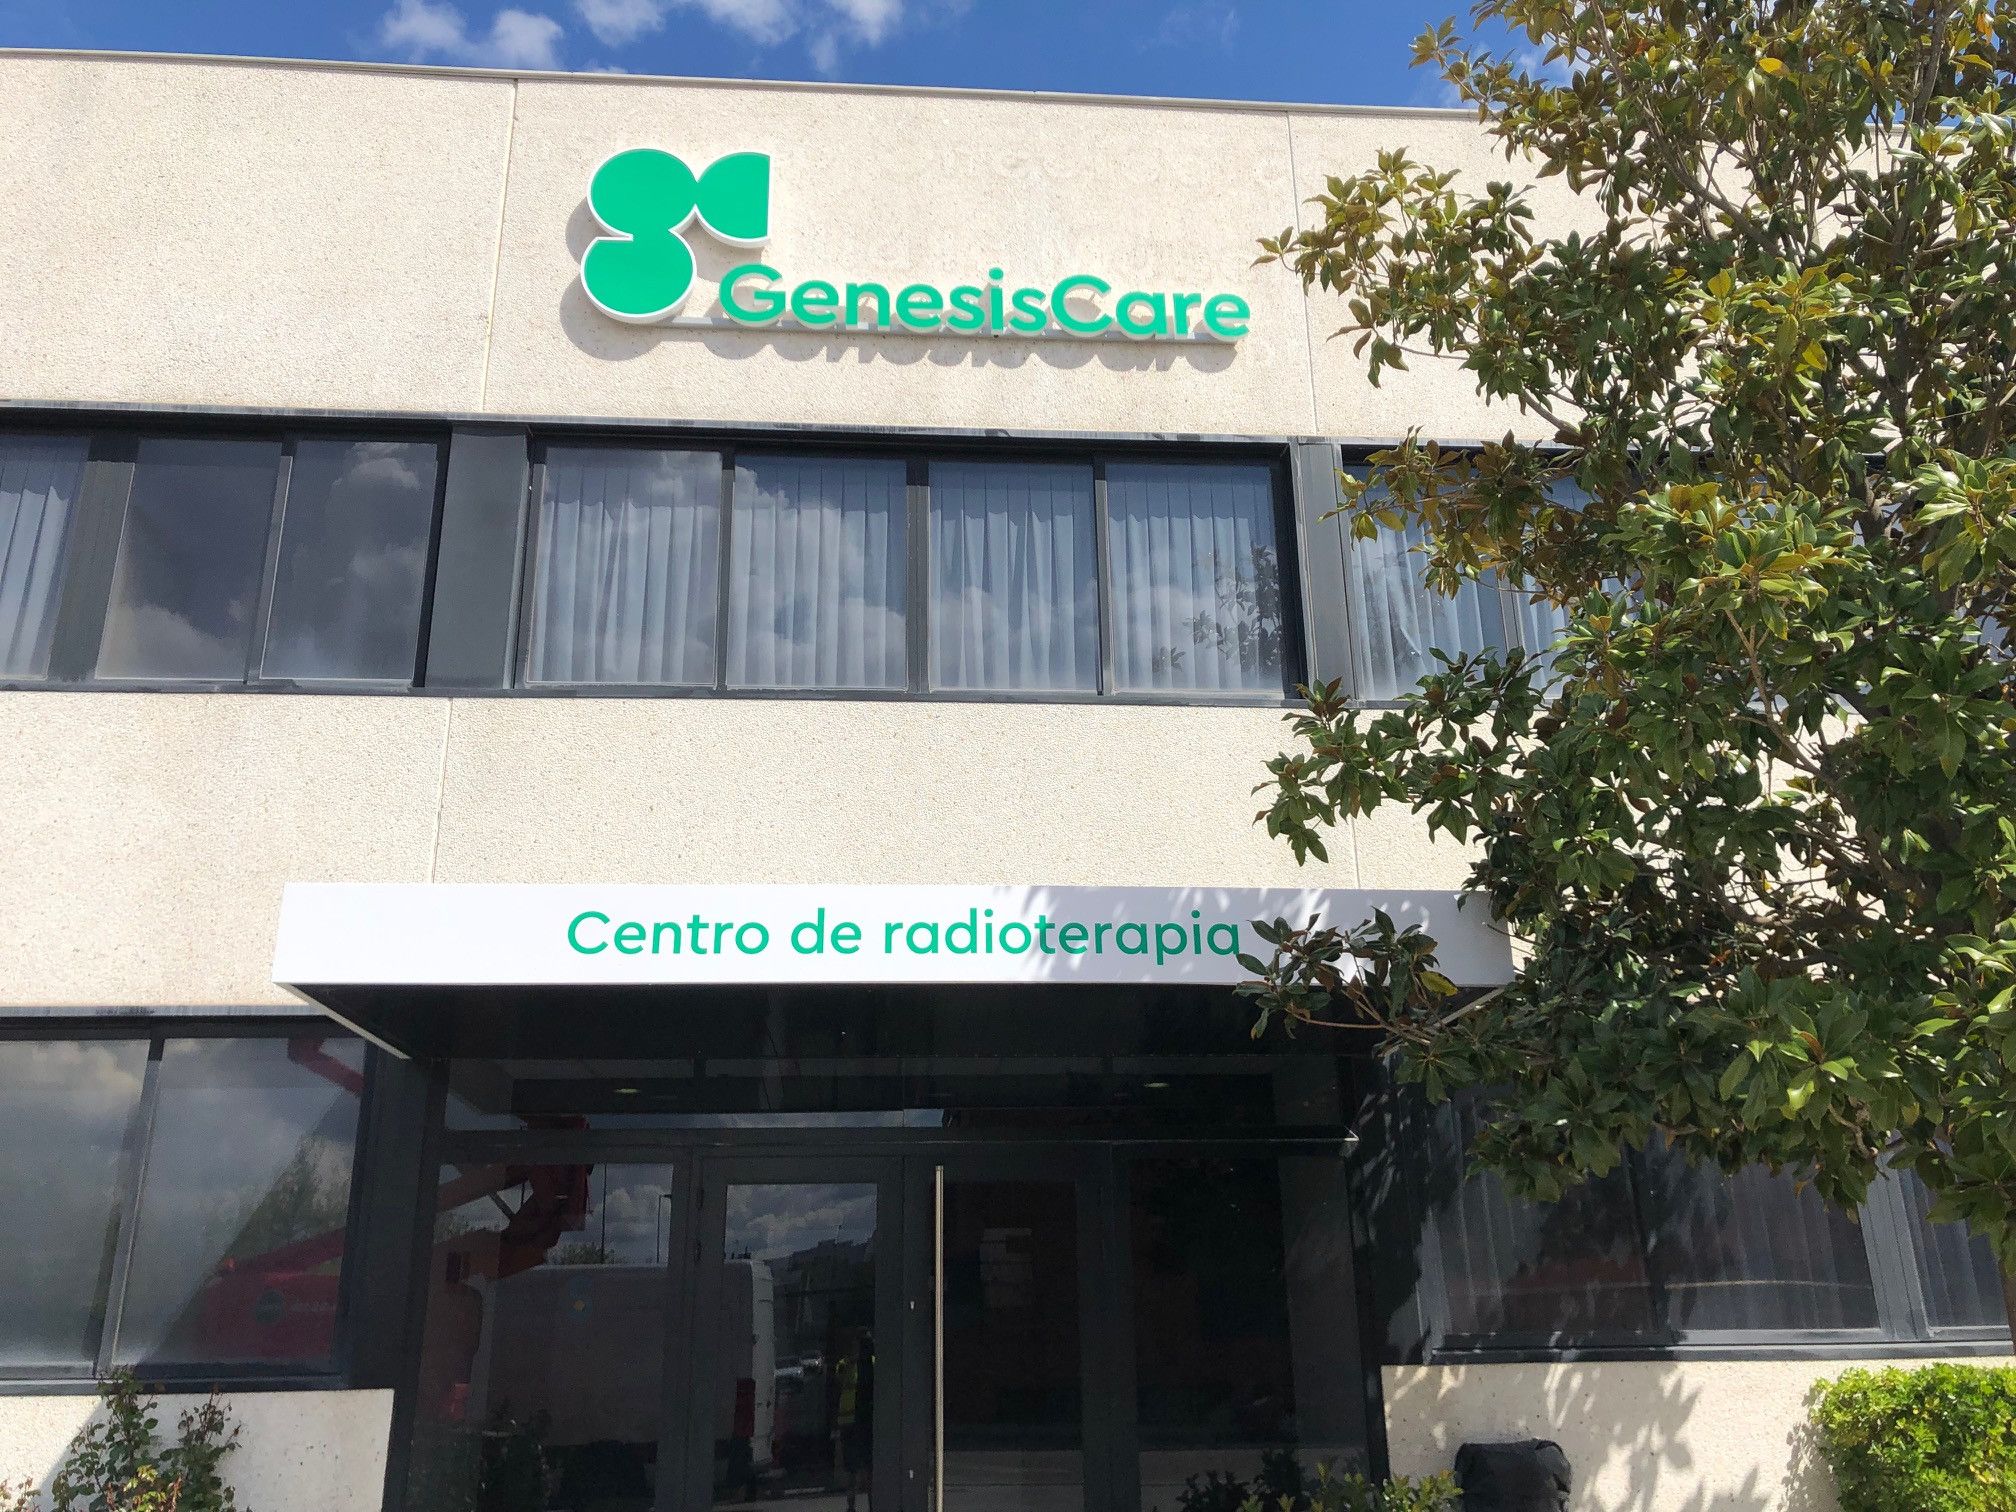 Global rebrand for Genesis Care by Pearce Signs